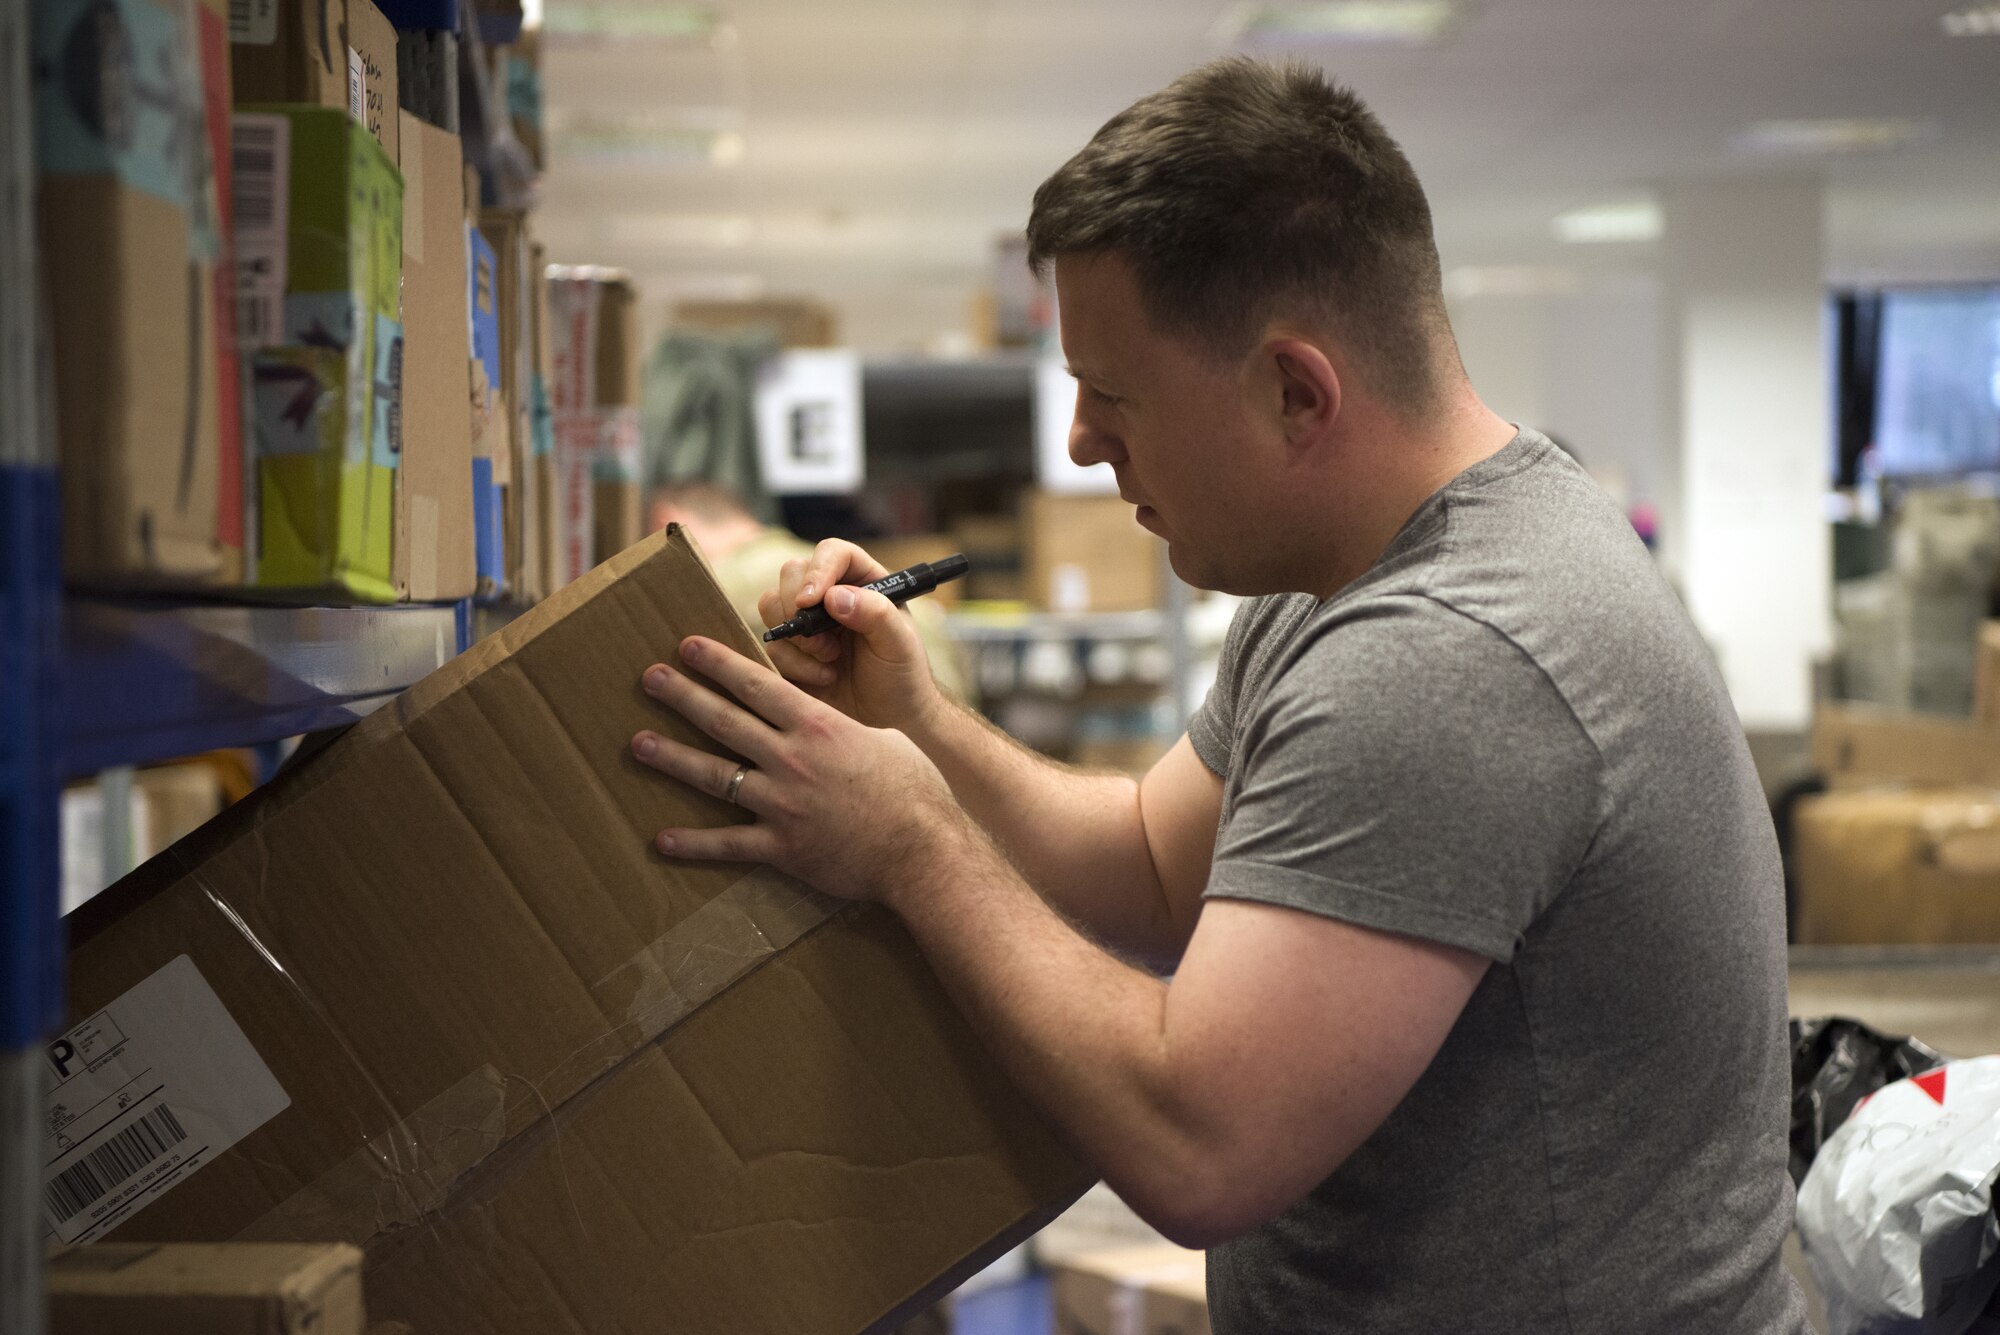 U.S. Air Force Tech. Sgt. Luke Johnson, a member of the 450th Intelligence Squadron, helps sort packages at the North Side Post Office on Ramstein Air Base, Germany, Dec. 7, 2018. The 450th IS hosted a volunteer day as a way for the squadron to give back to non-profit organizations around Ramstein Air Base. (U.S. Air Force Photo by Airman 1st Class Noah Coger)